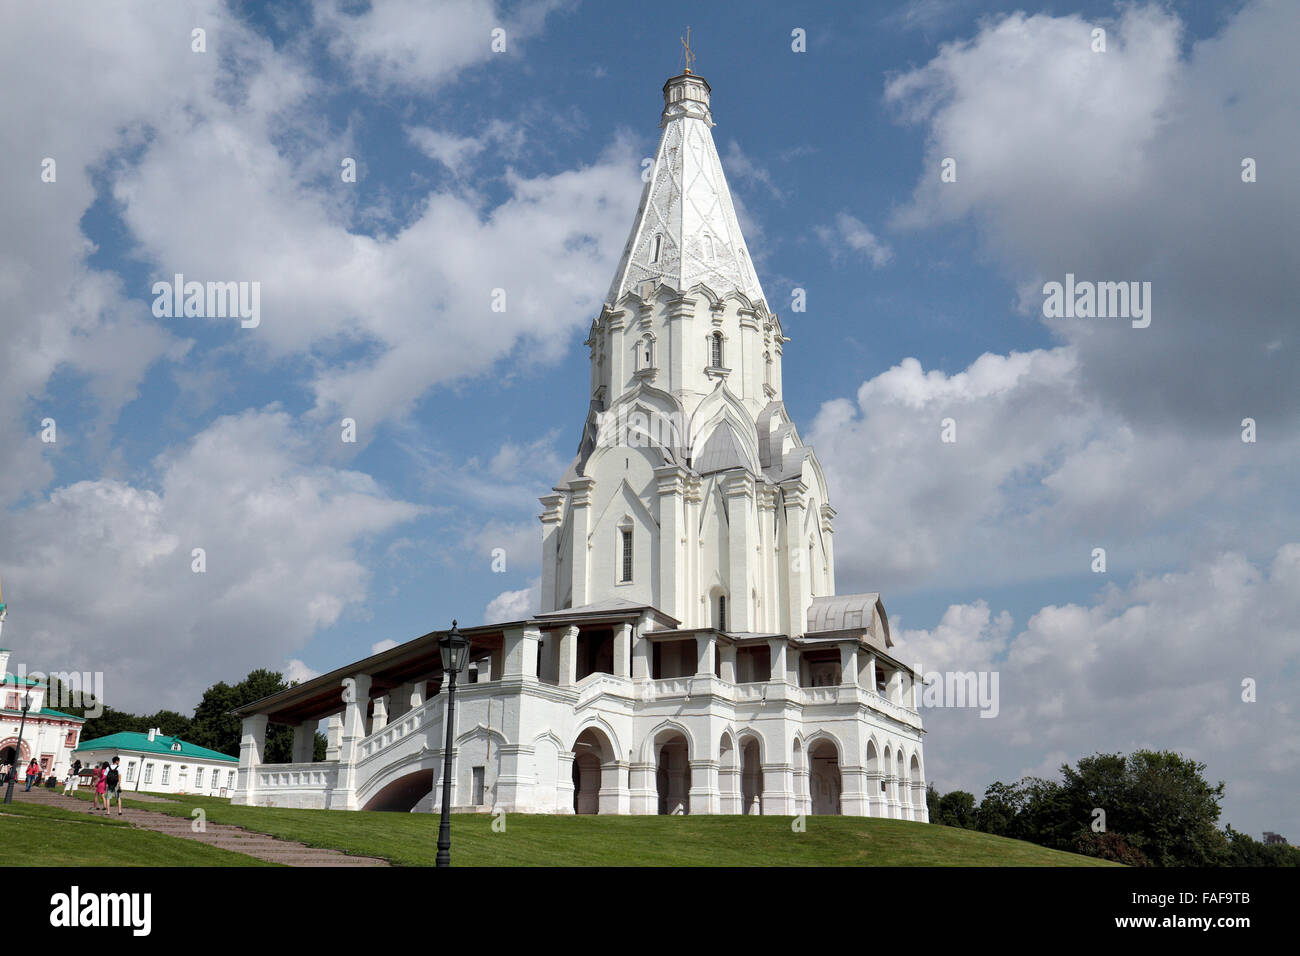 The Church of the Ascension in Kolomenskoye (Kolomenskoye Historical and Architectural Museum and Reserve), Moscow, Russia. Stock Photo